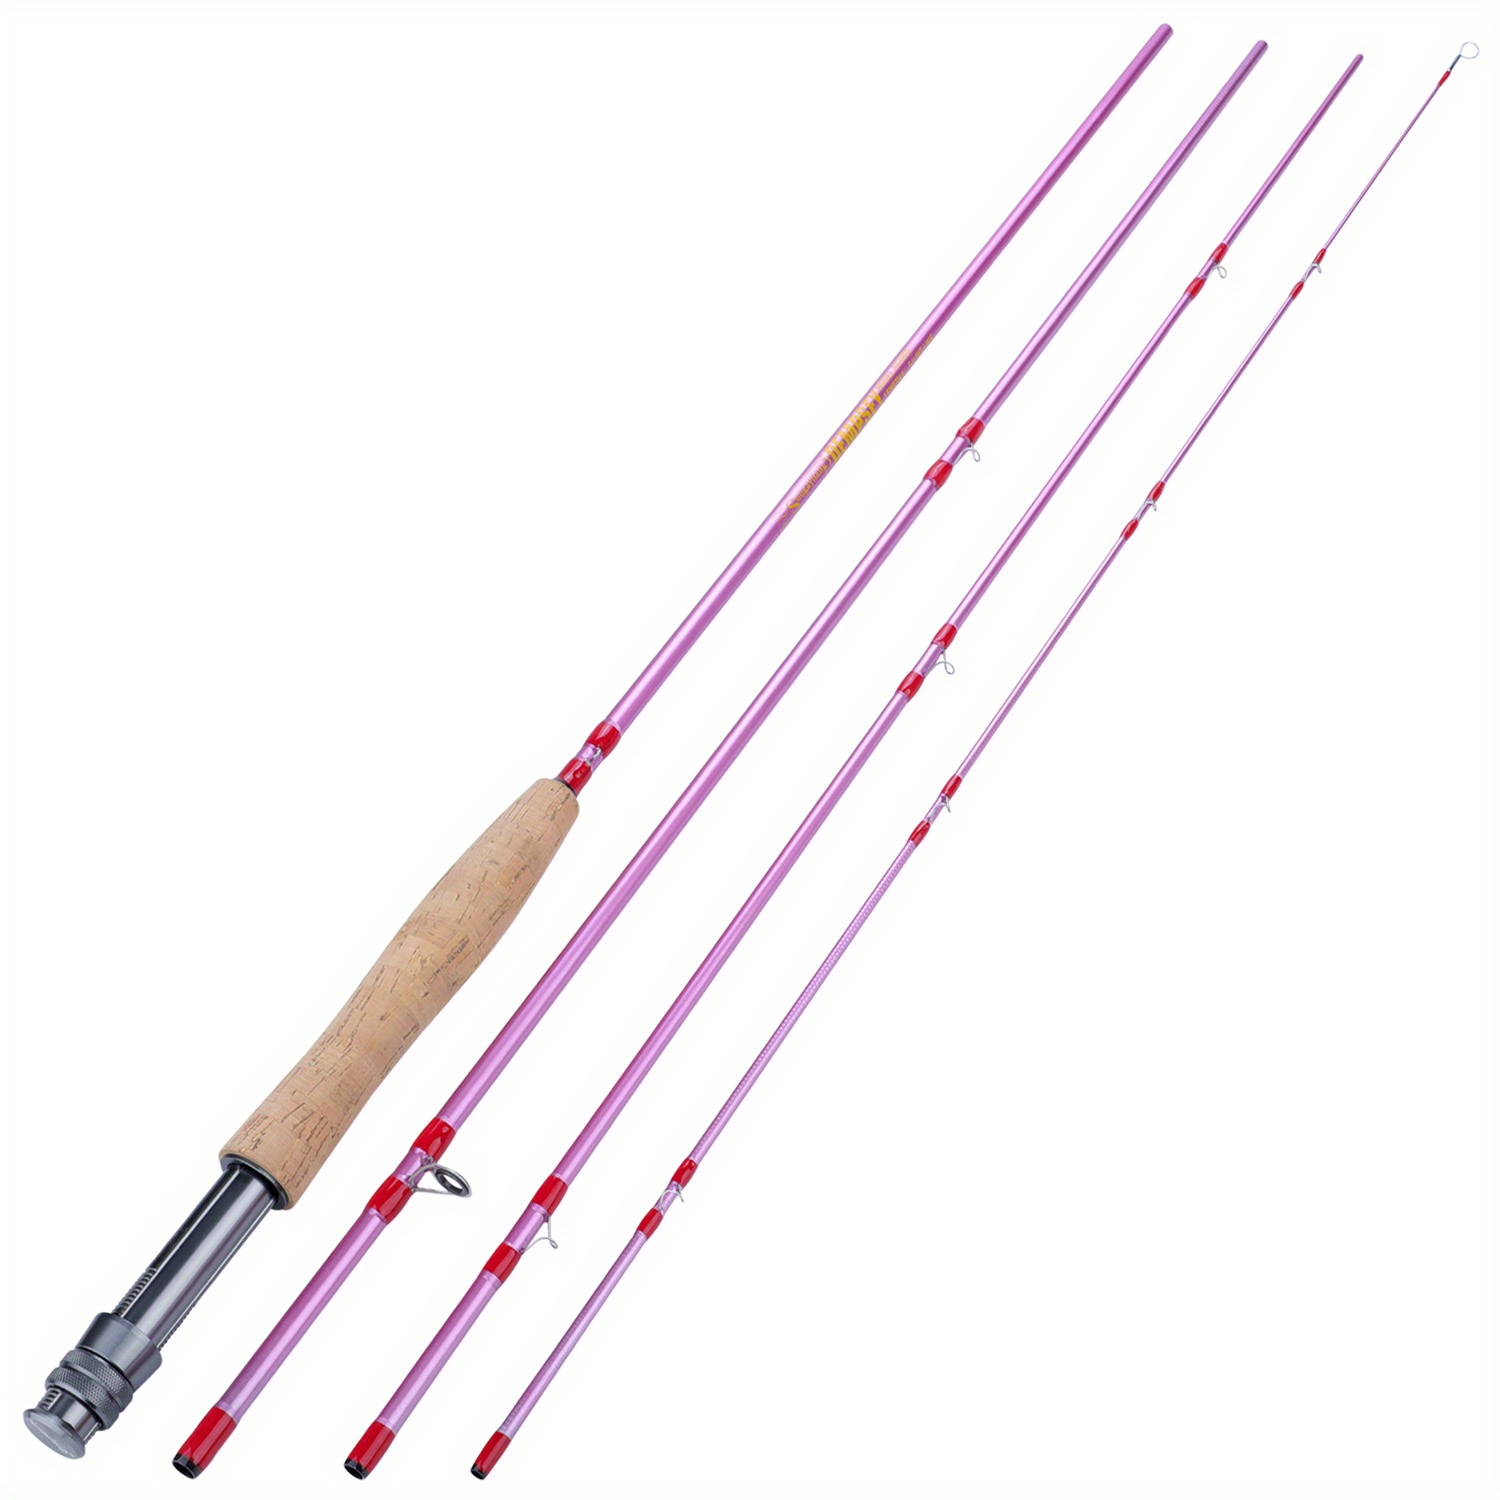 Sougayilang Fly Fishing Rod - High-Performance IM8 Carbon Blank, 9ft for  5/6wt and 7/8wt, Travel-Friendly Design